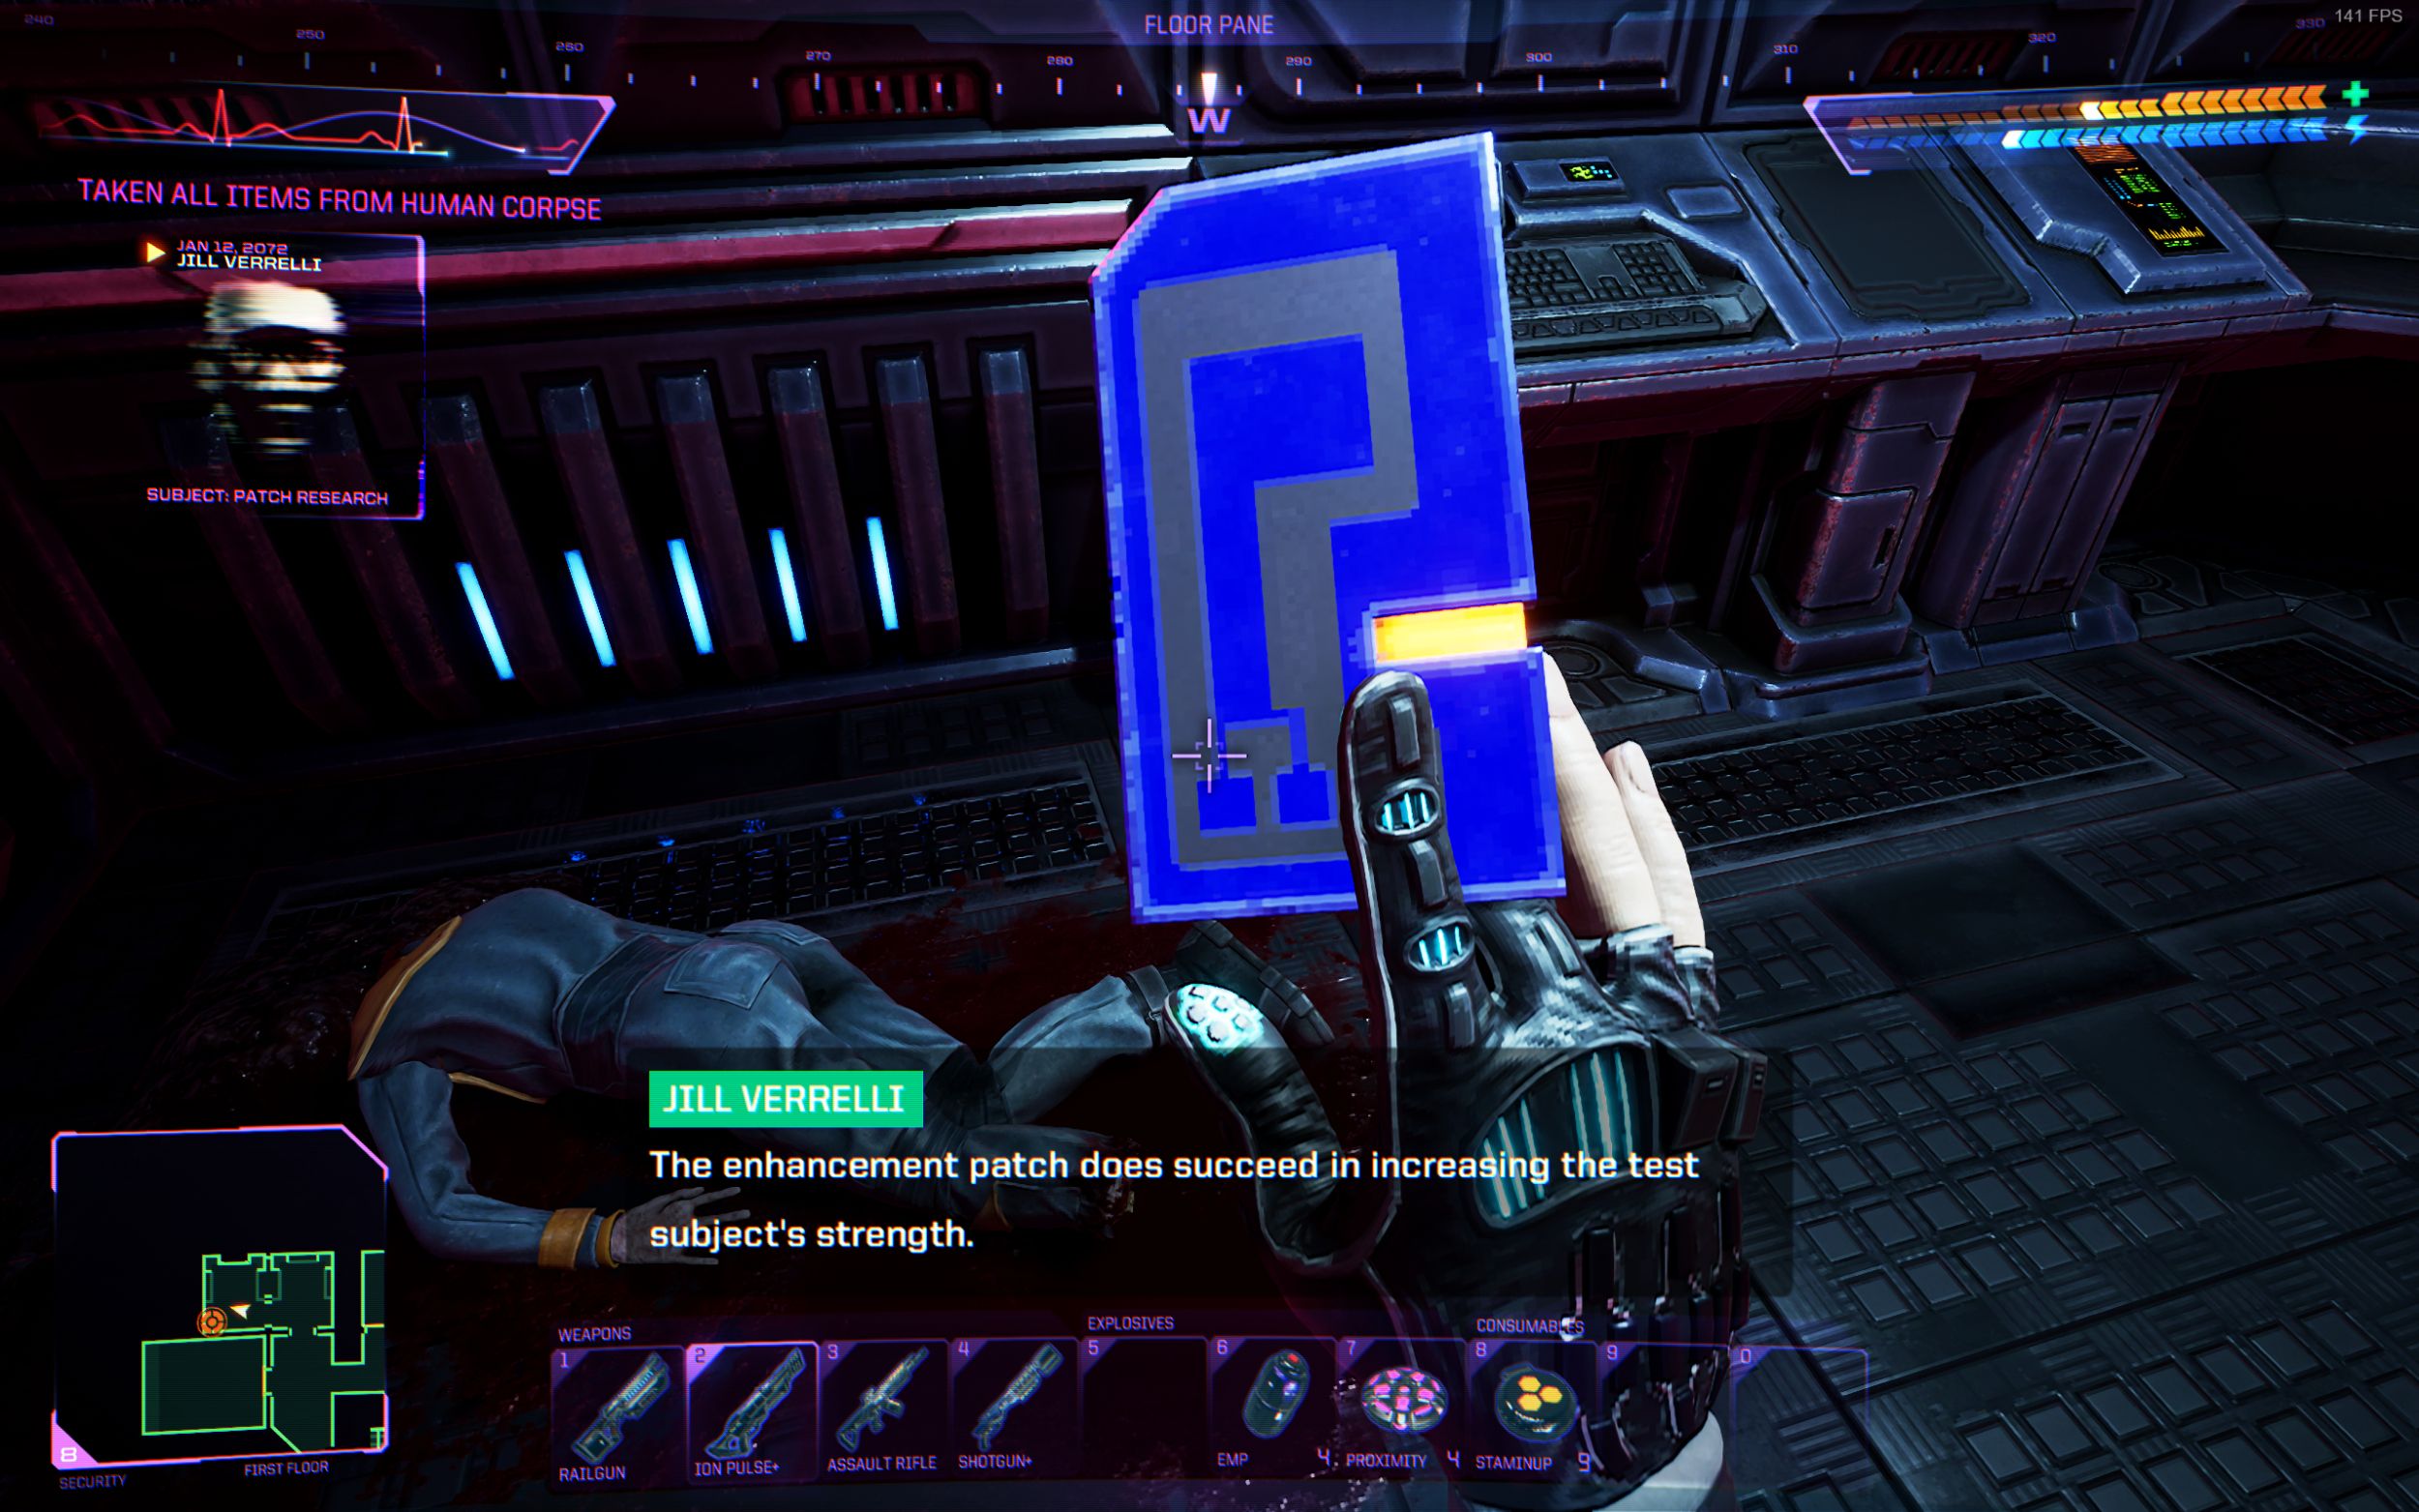 System shock: Group B access card found in security